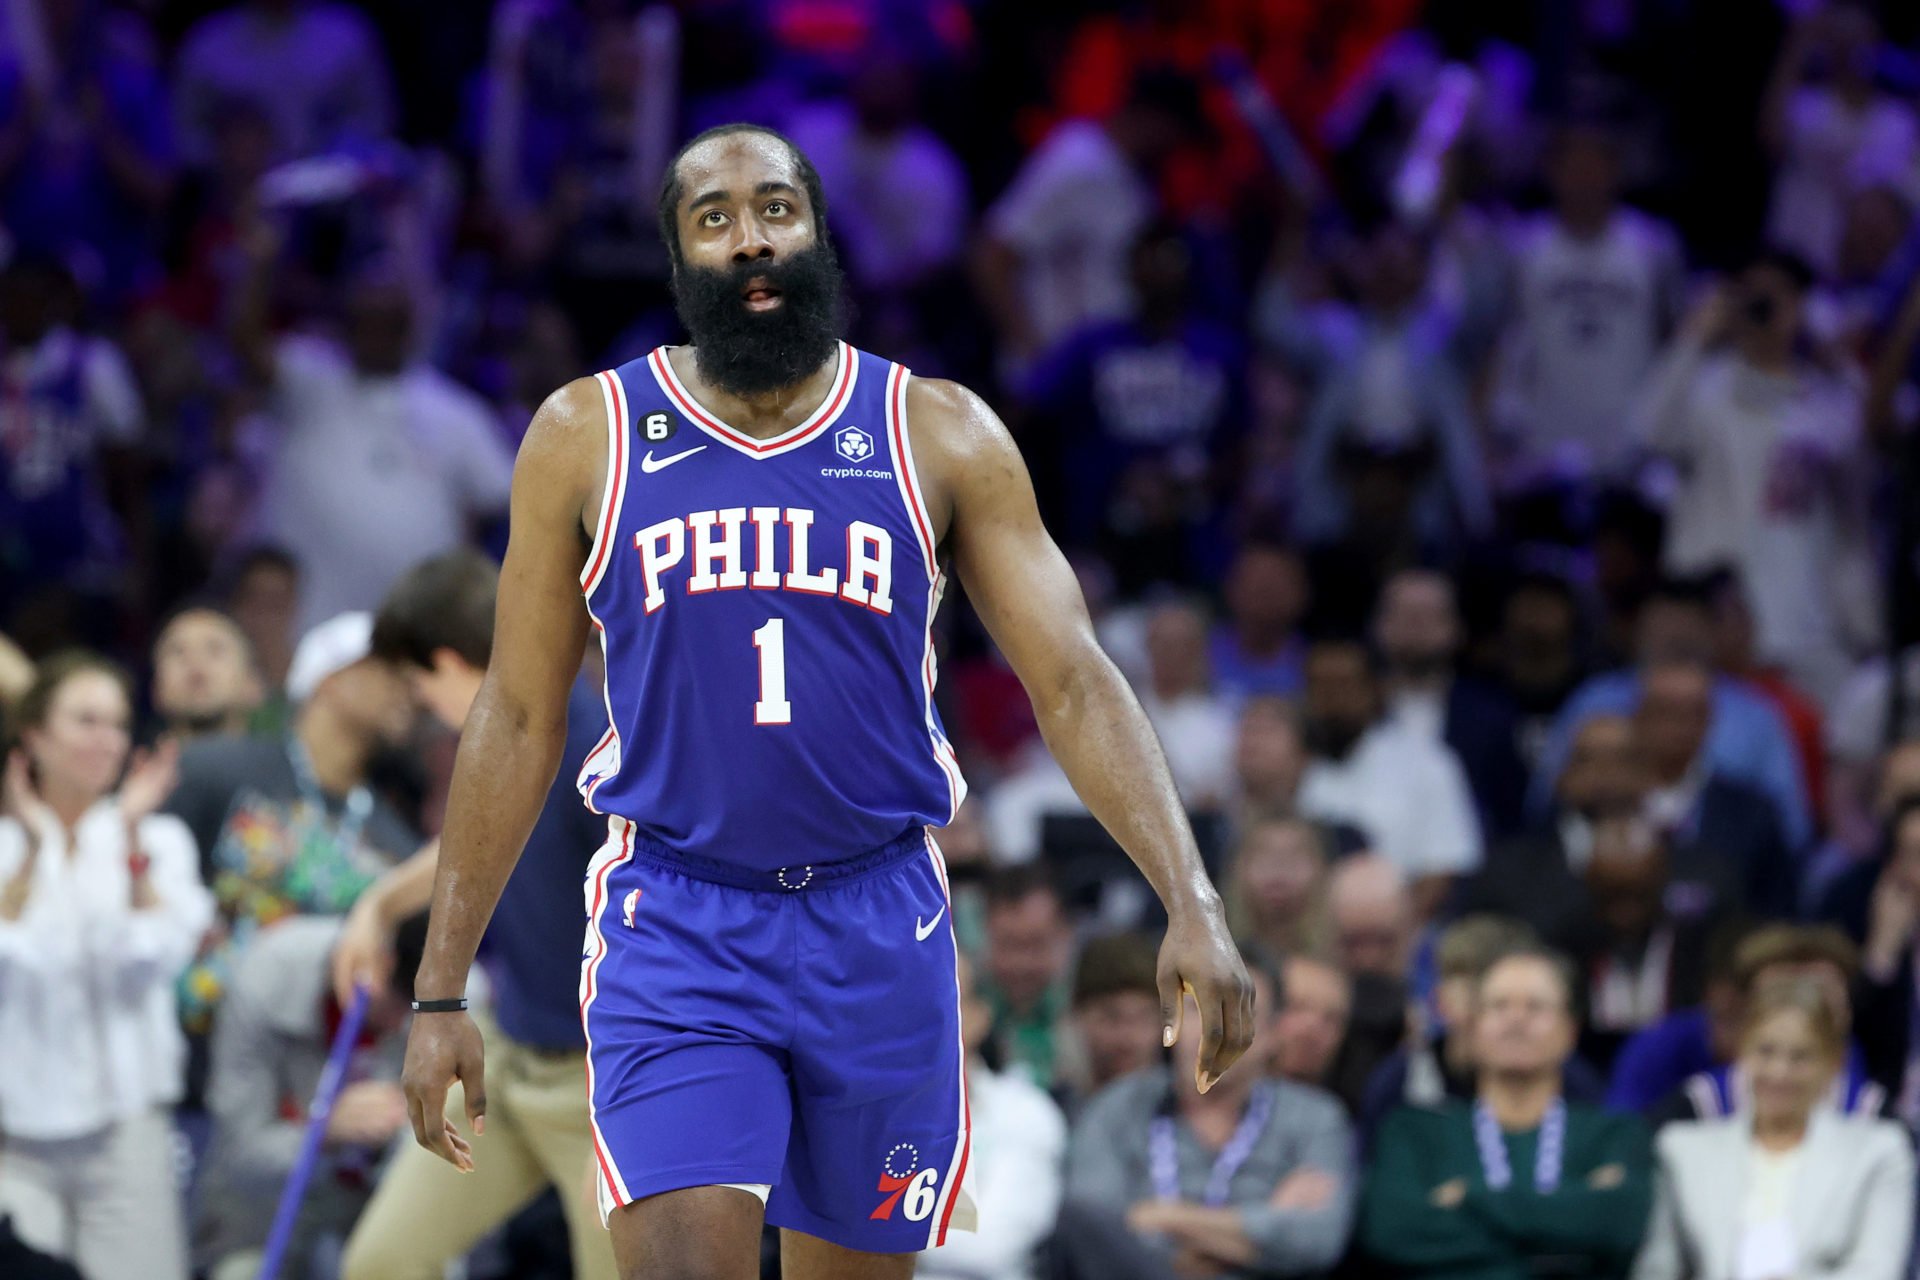 Image of James Harden 'partying in club shirtless' go viral after ...